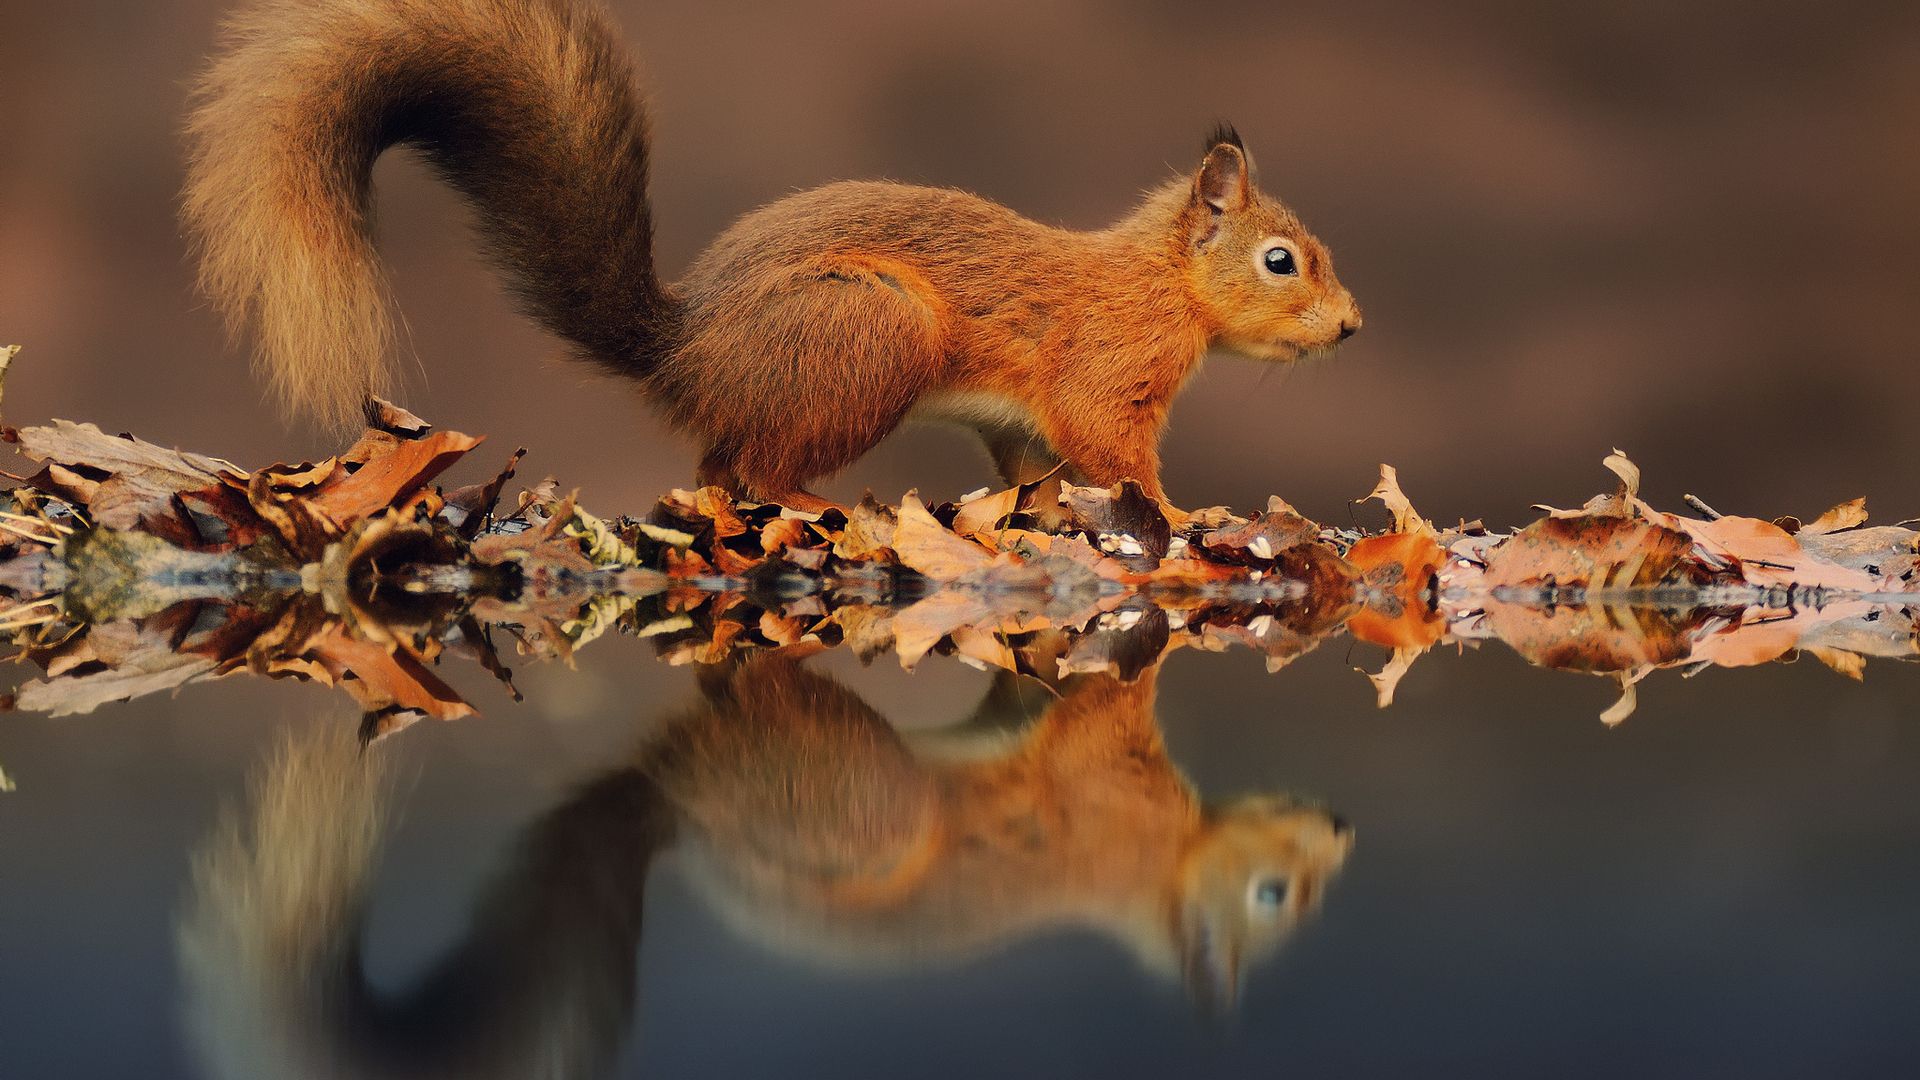 Free download Squirrel Wallpaper Image Photo Picture Background [1920x1080] for your Desktop, Mobile & Tablet. Explore Squirrel Wallpaper. Bing Squirrel Wallpaper, Funny Squirrel Wallpaper, Baby Squirrel Wallpaper